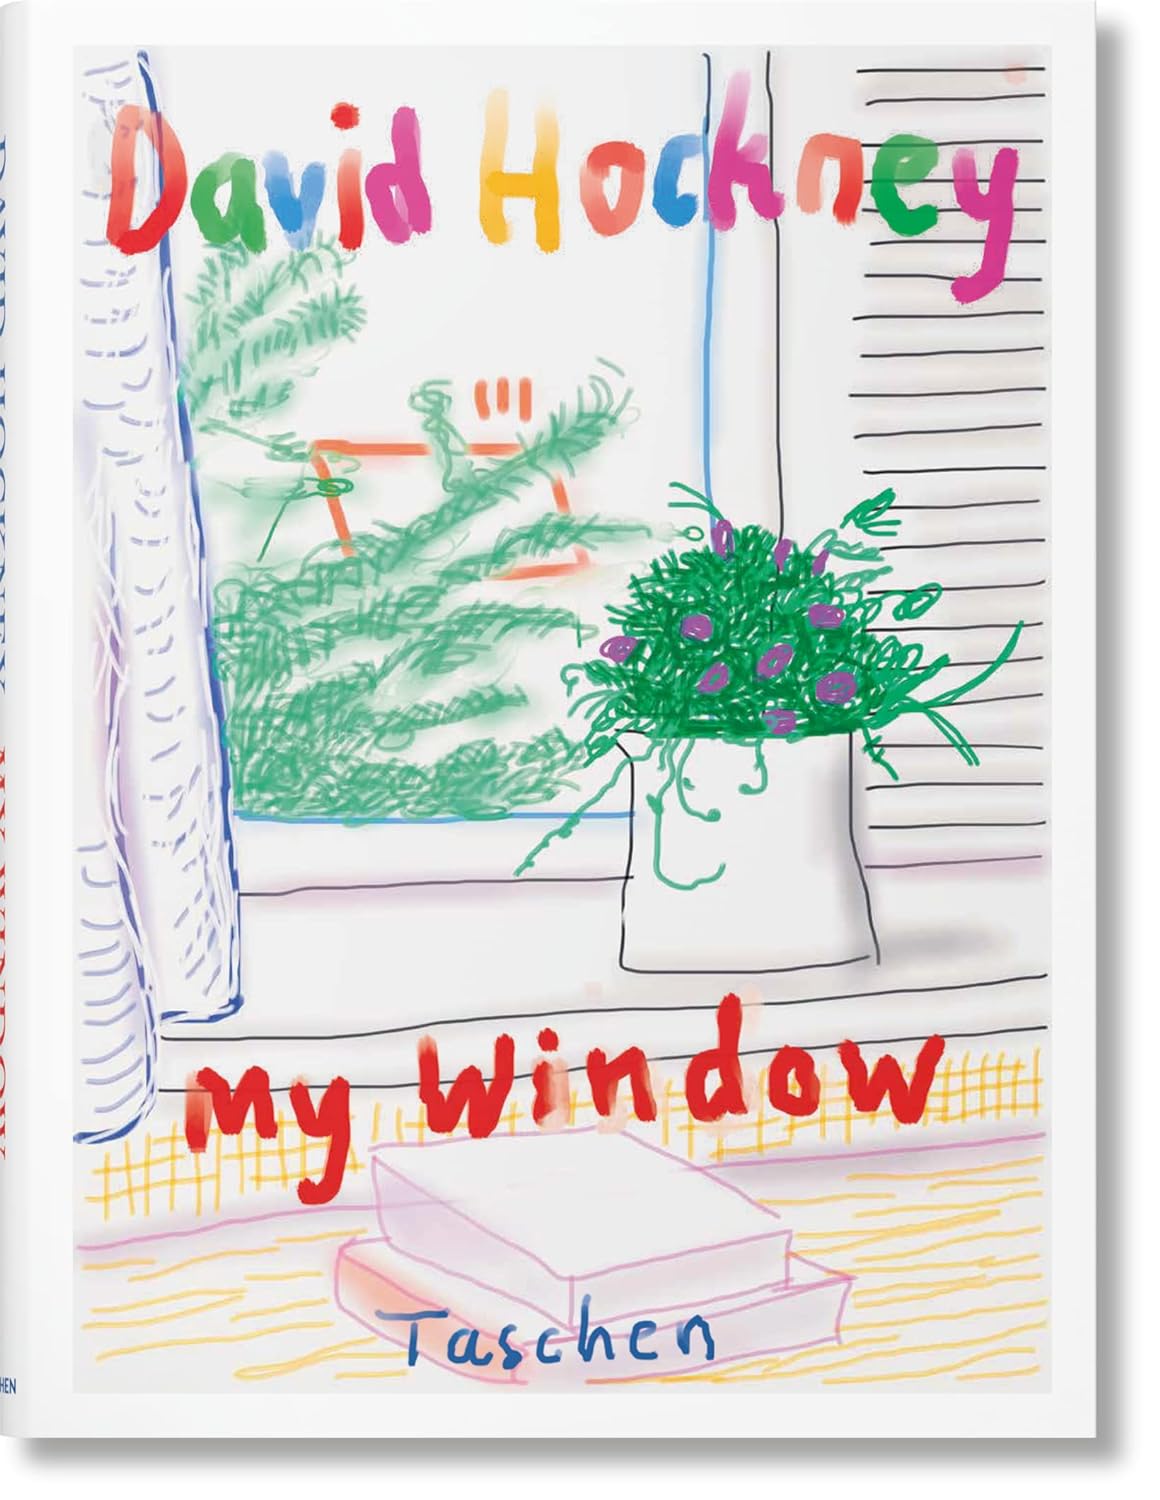 Check Out the Deals for David Hockney. My Window - Save 32%!